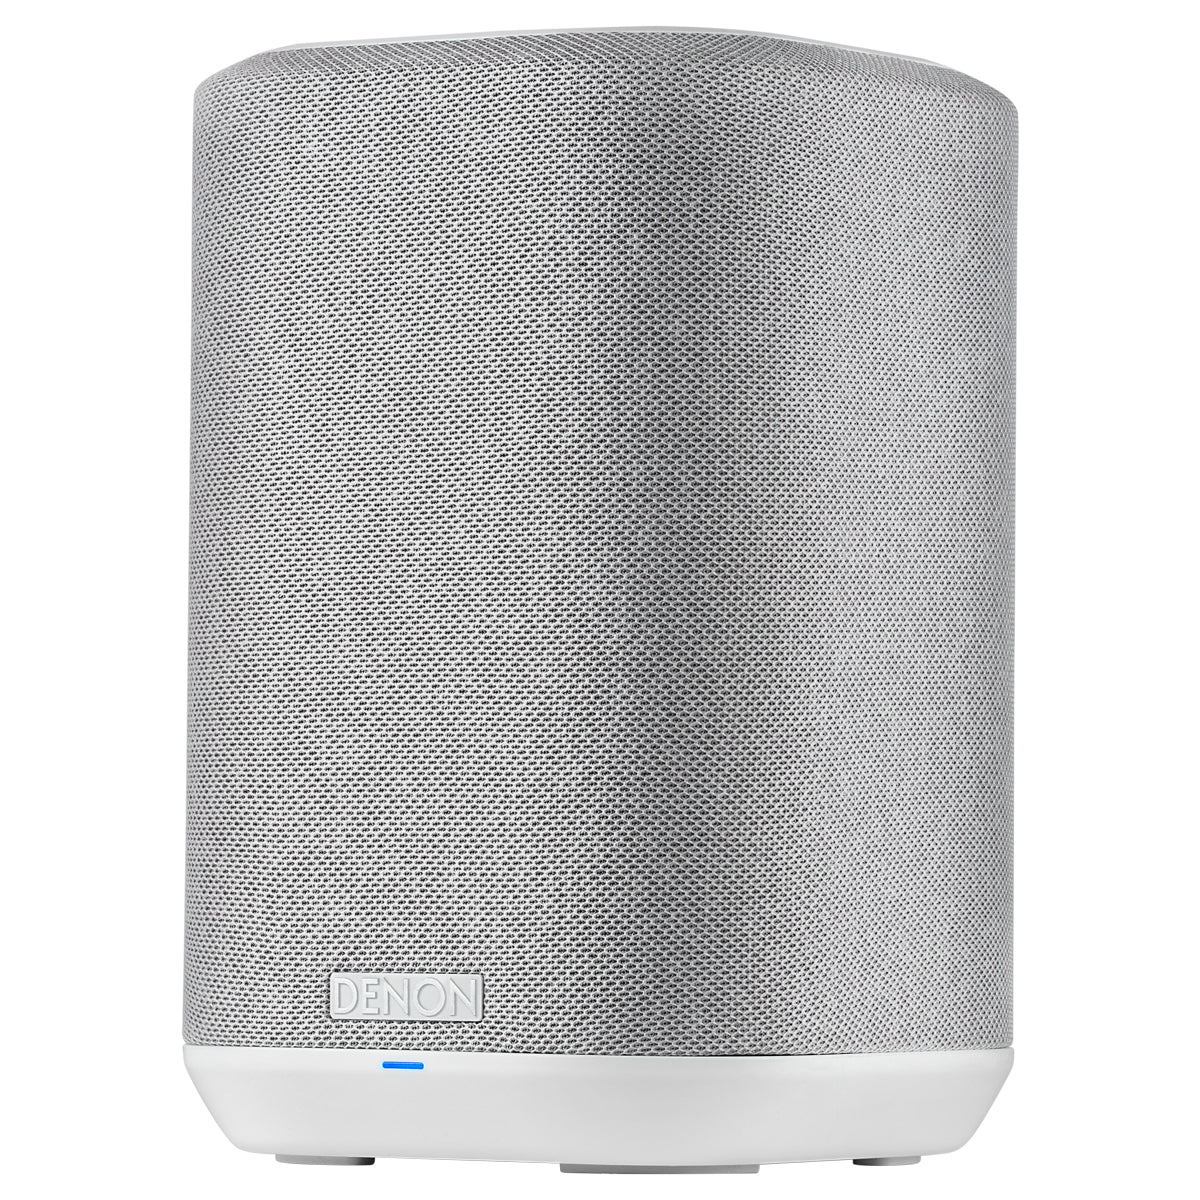 Denon Home 150 Wireless Speaker - White (out of stock) - The Audio Experts